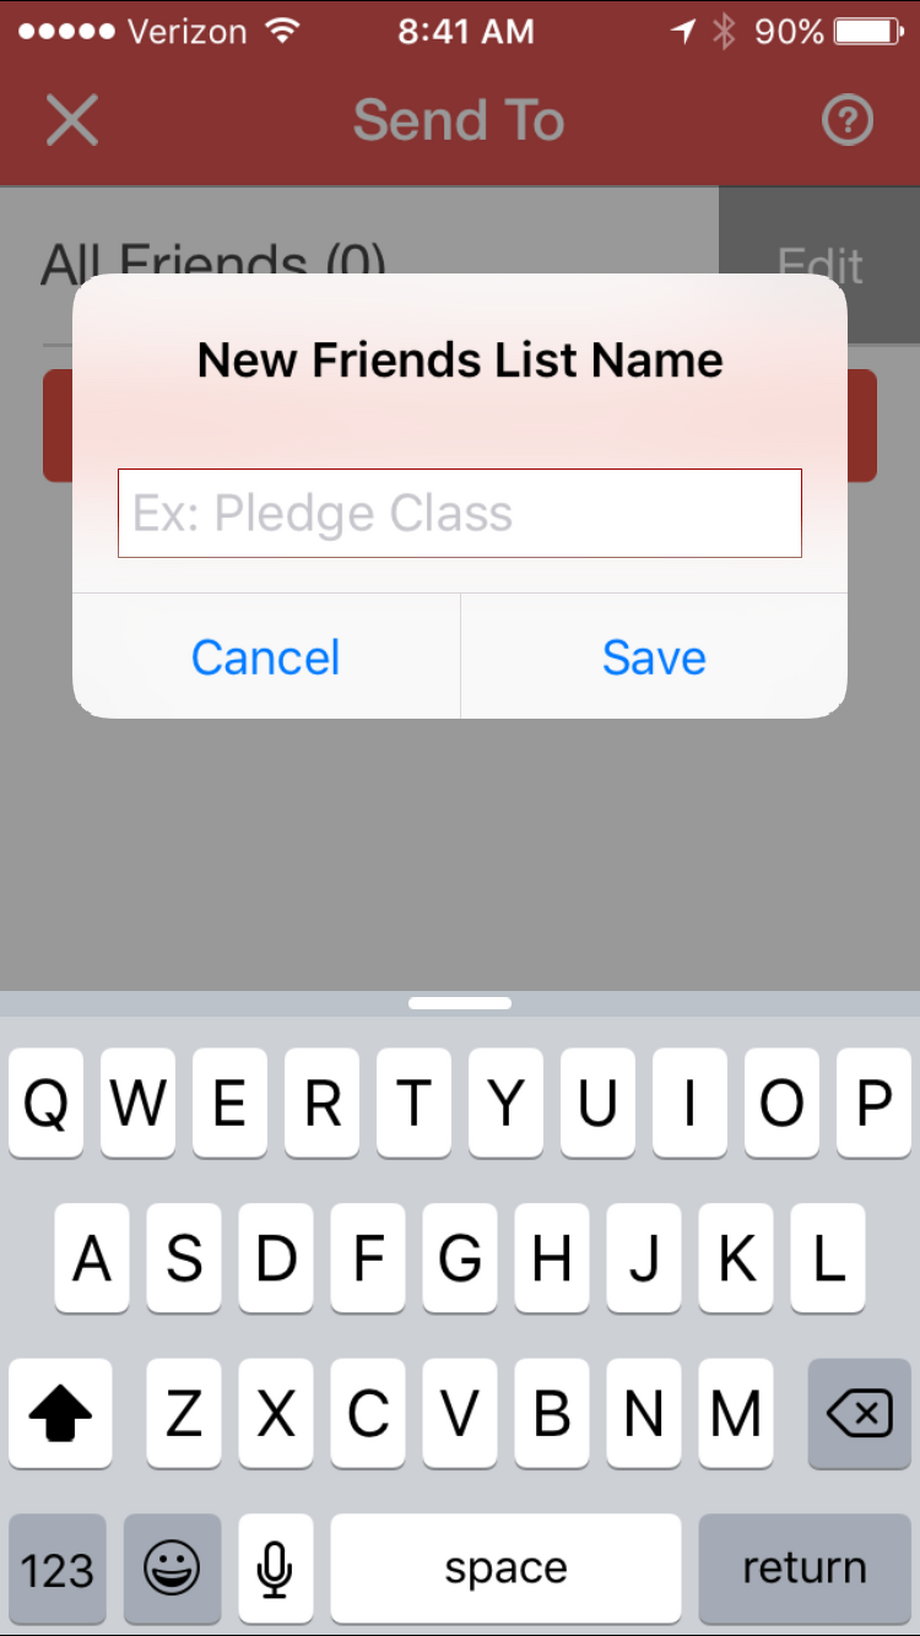 You can send a request to all friends nearby, or create lists.